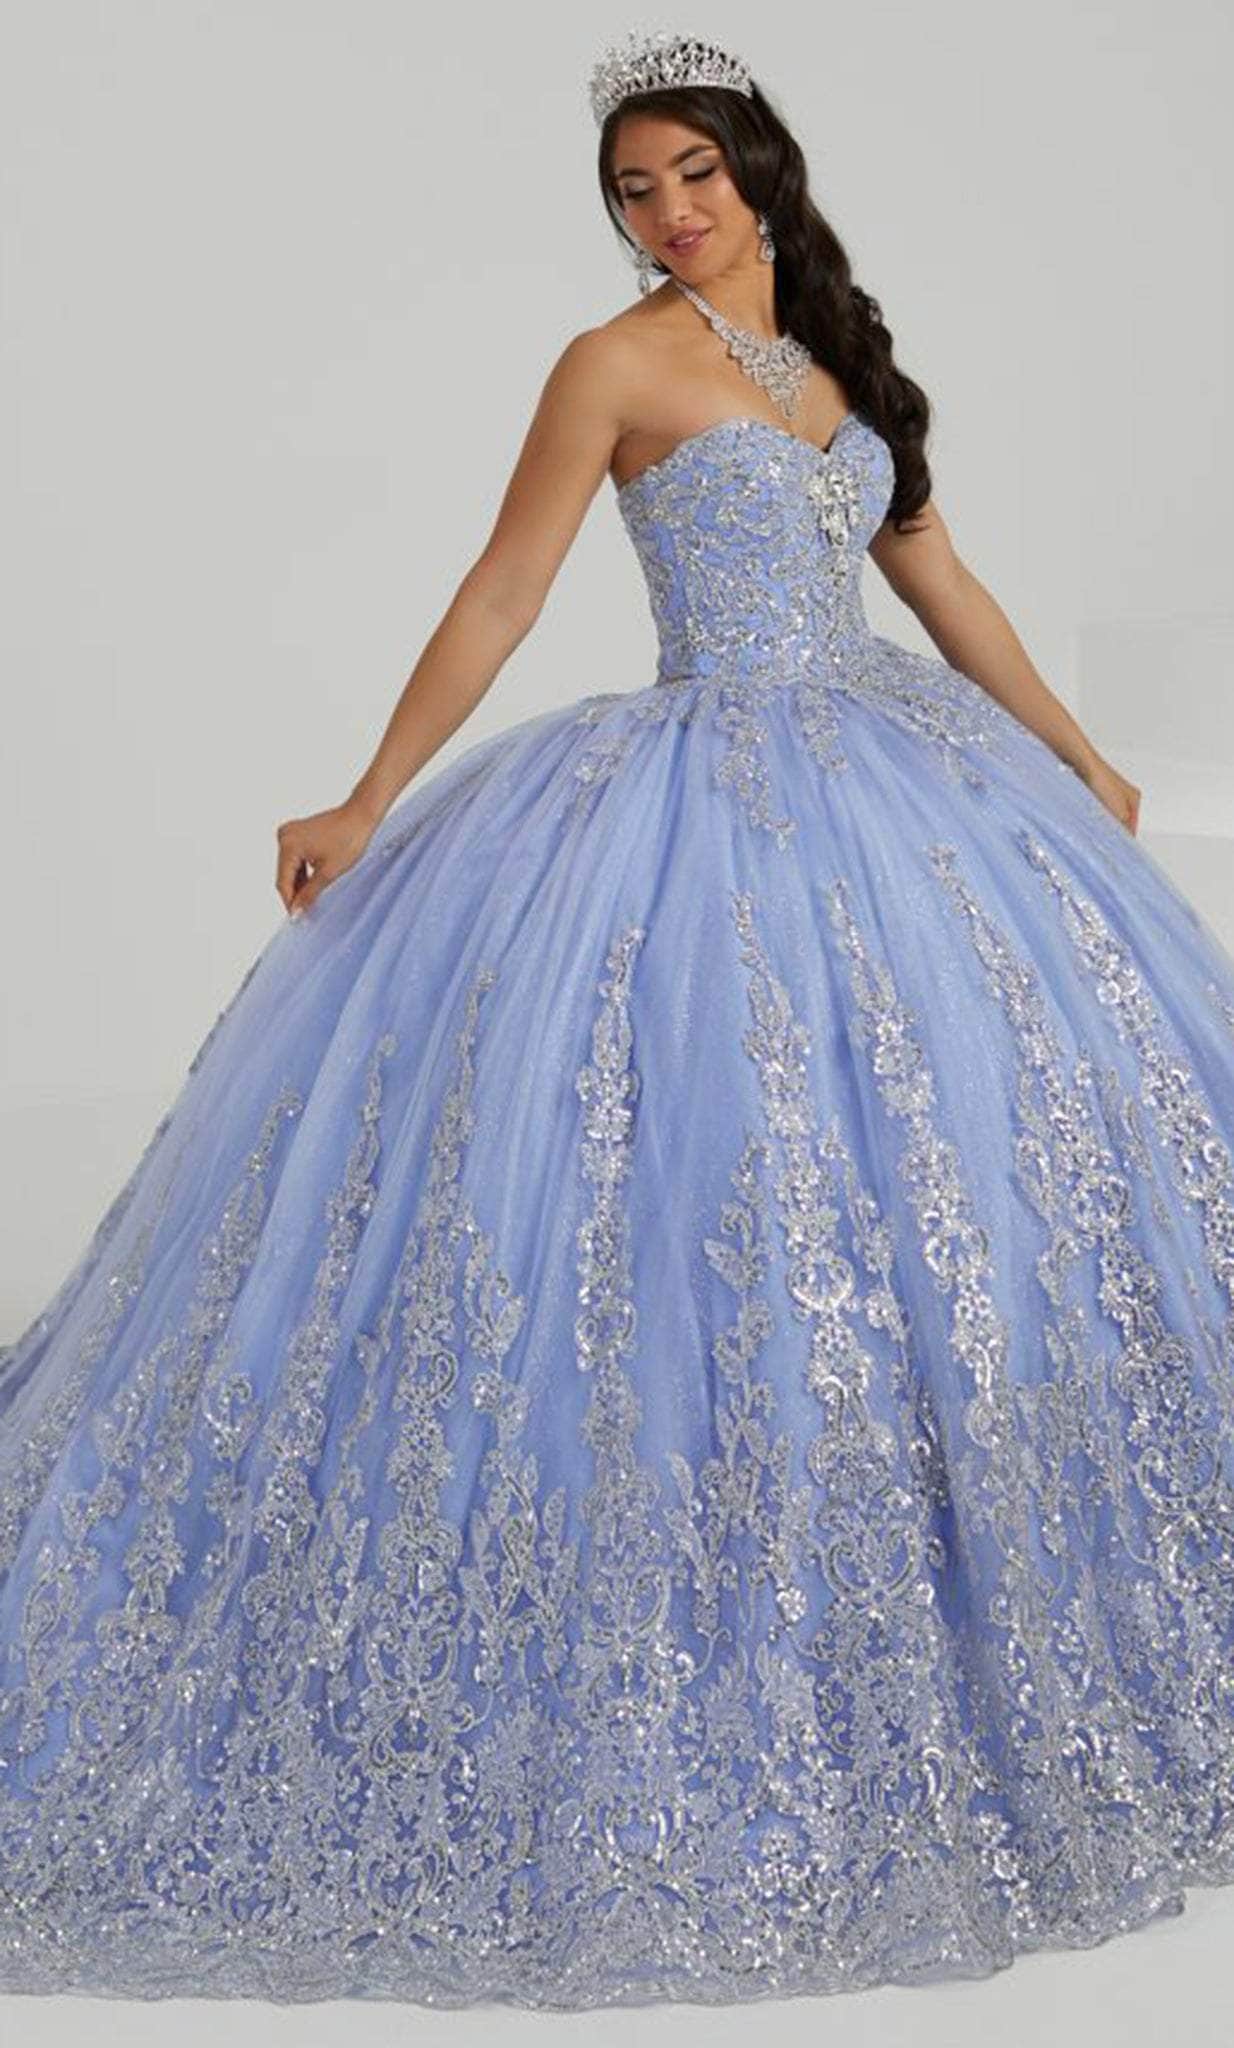 Fiesta Gowns 56481 - 3-Way Tulle-Strapped Ballgown
